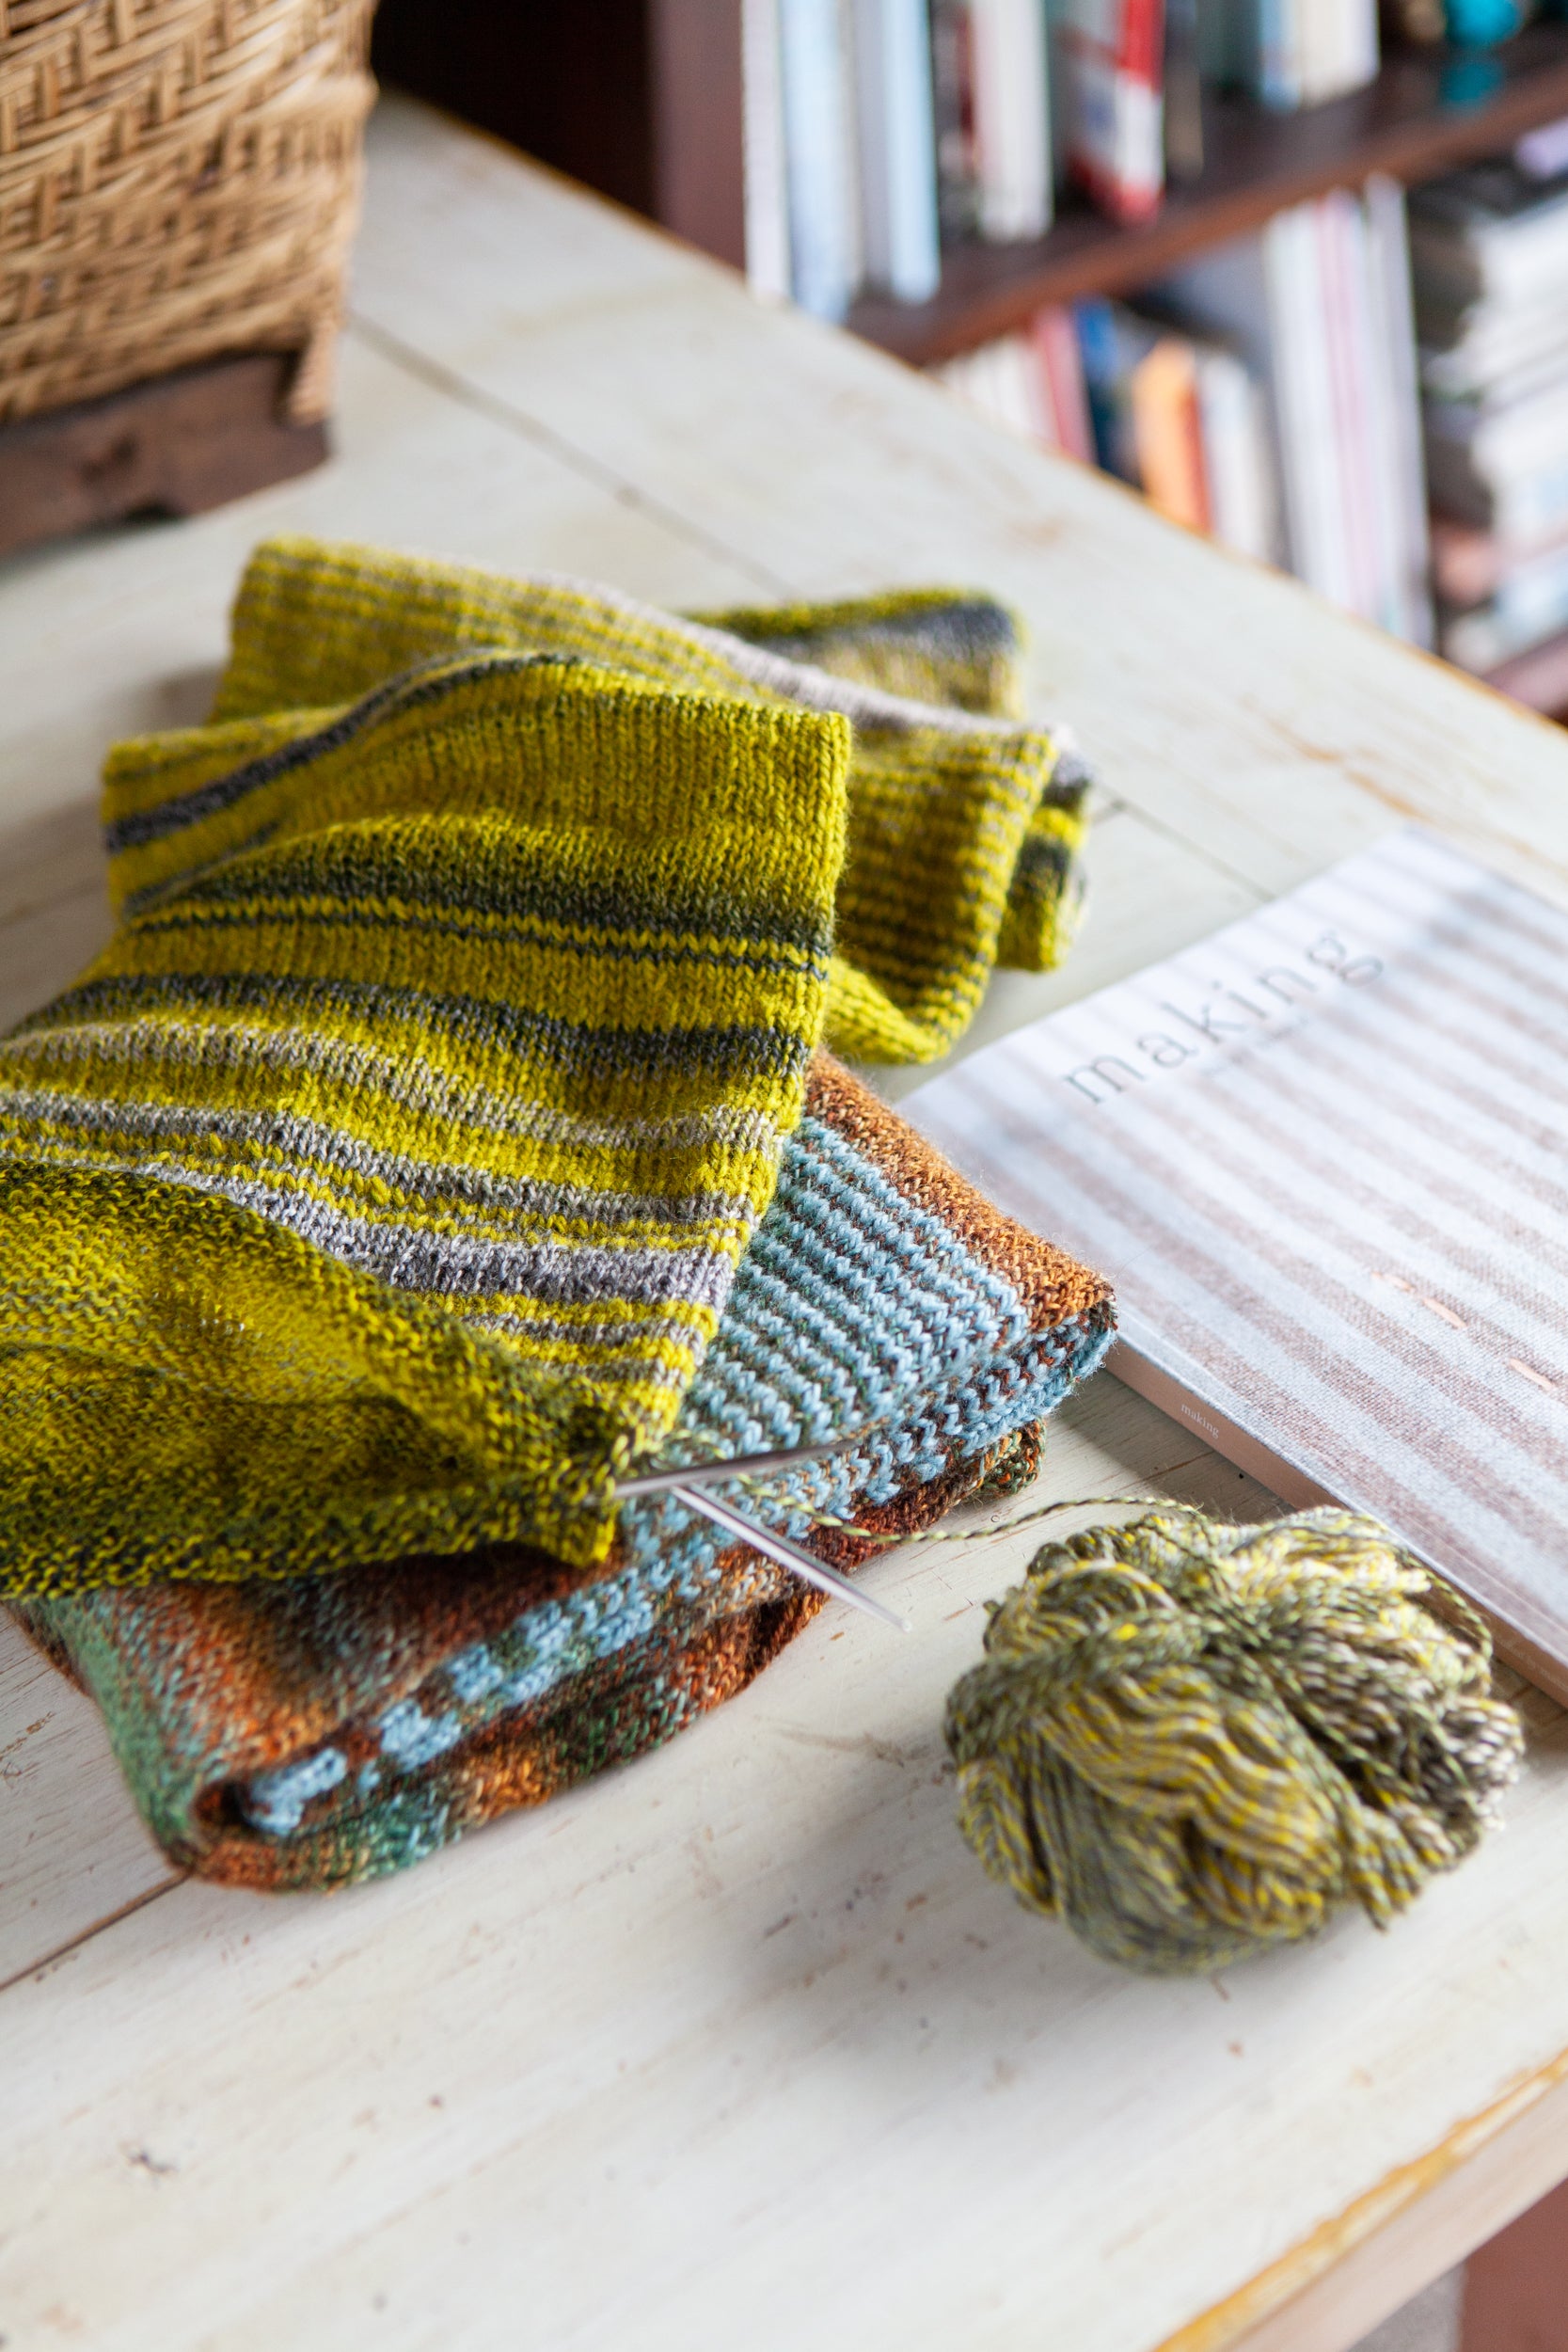 5 Ways Knitting Helps with Mental Health